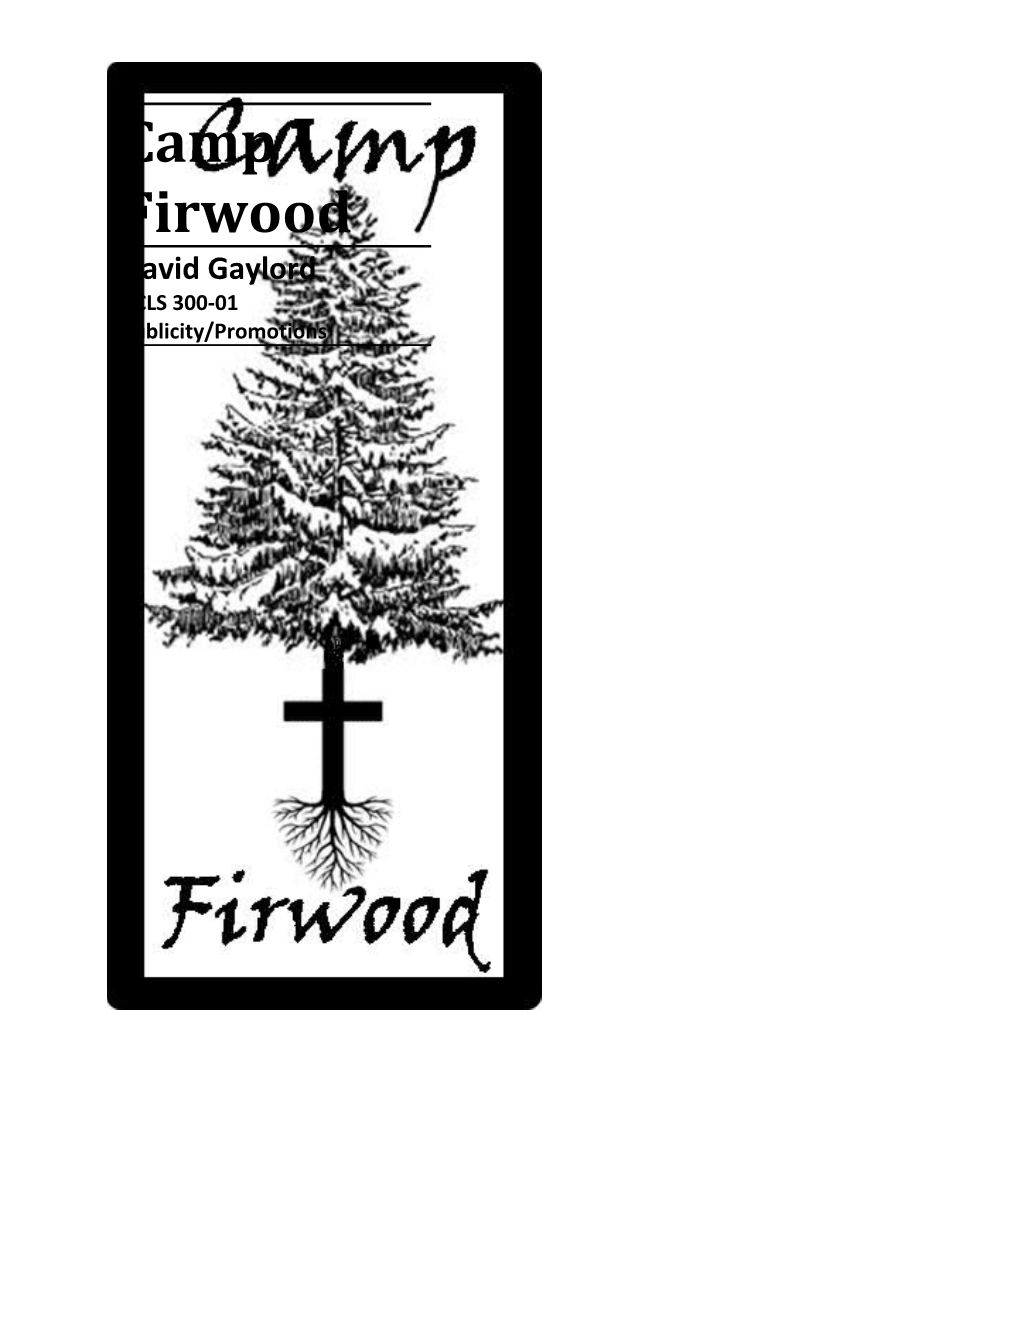 History of Camp Firwood